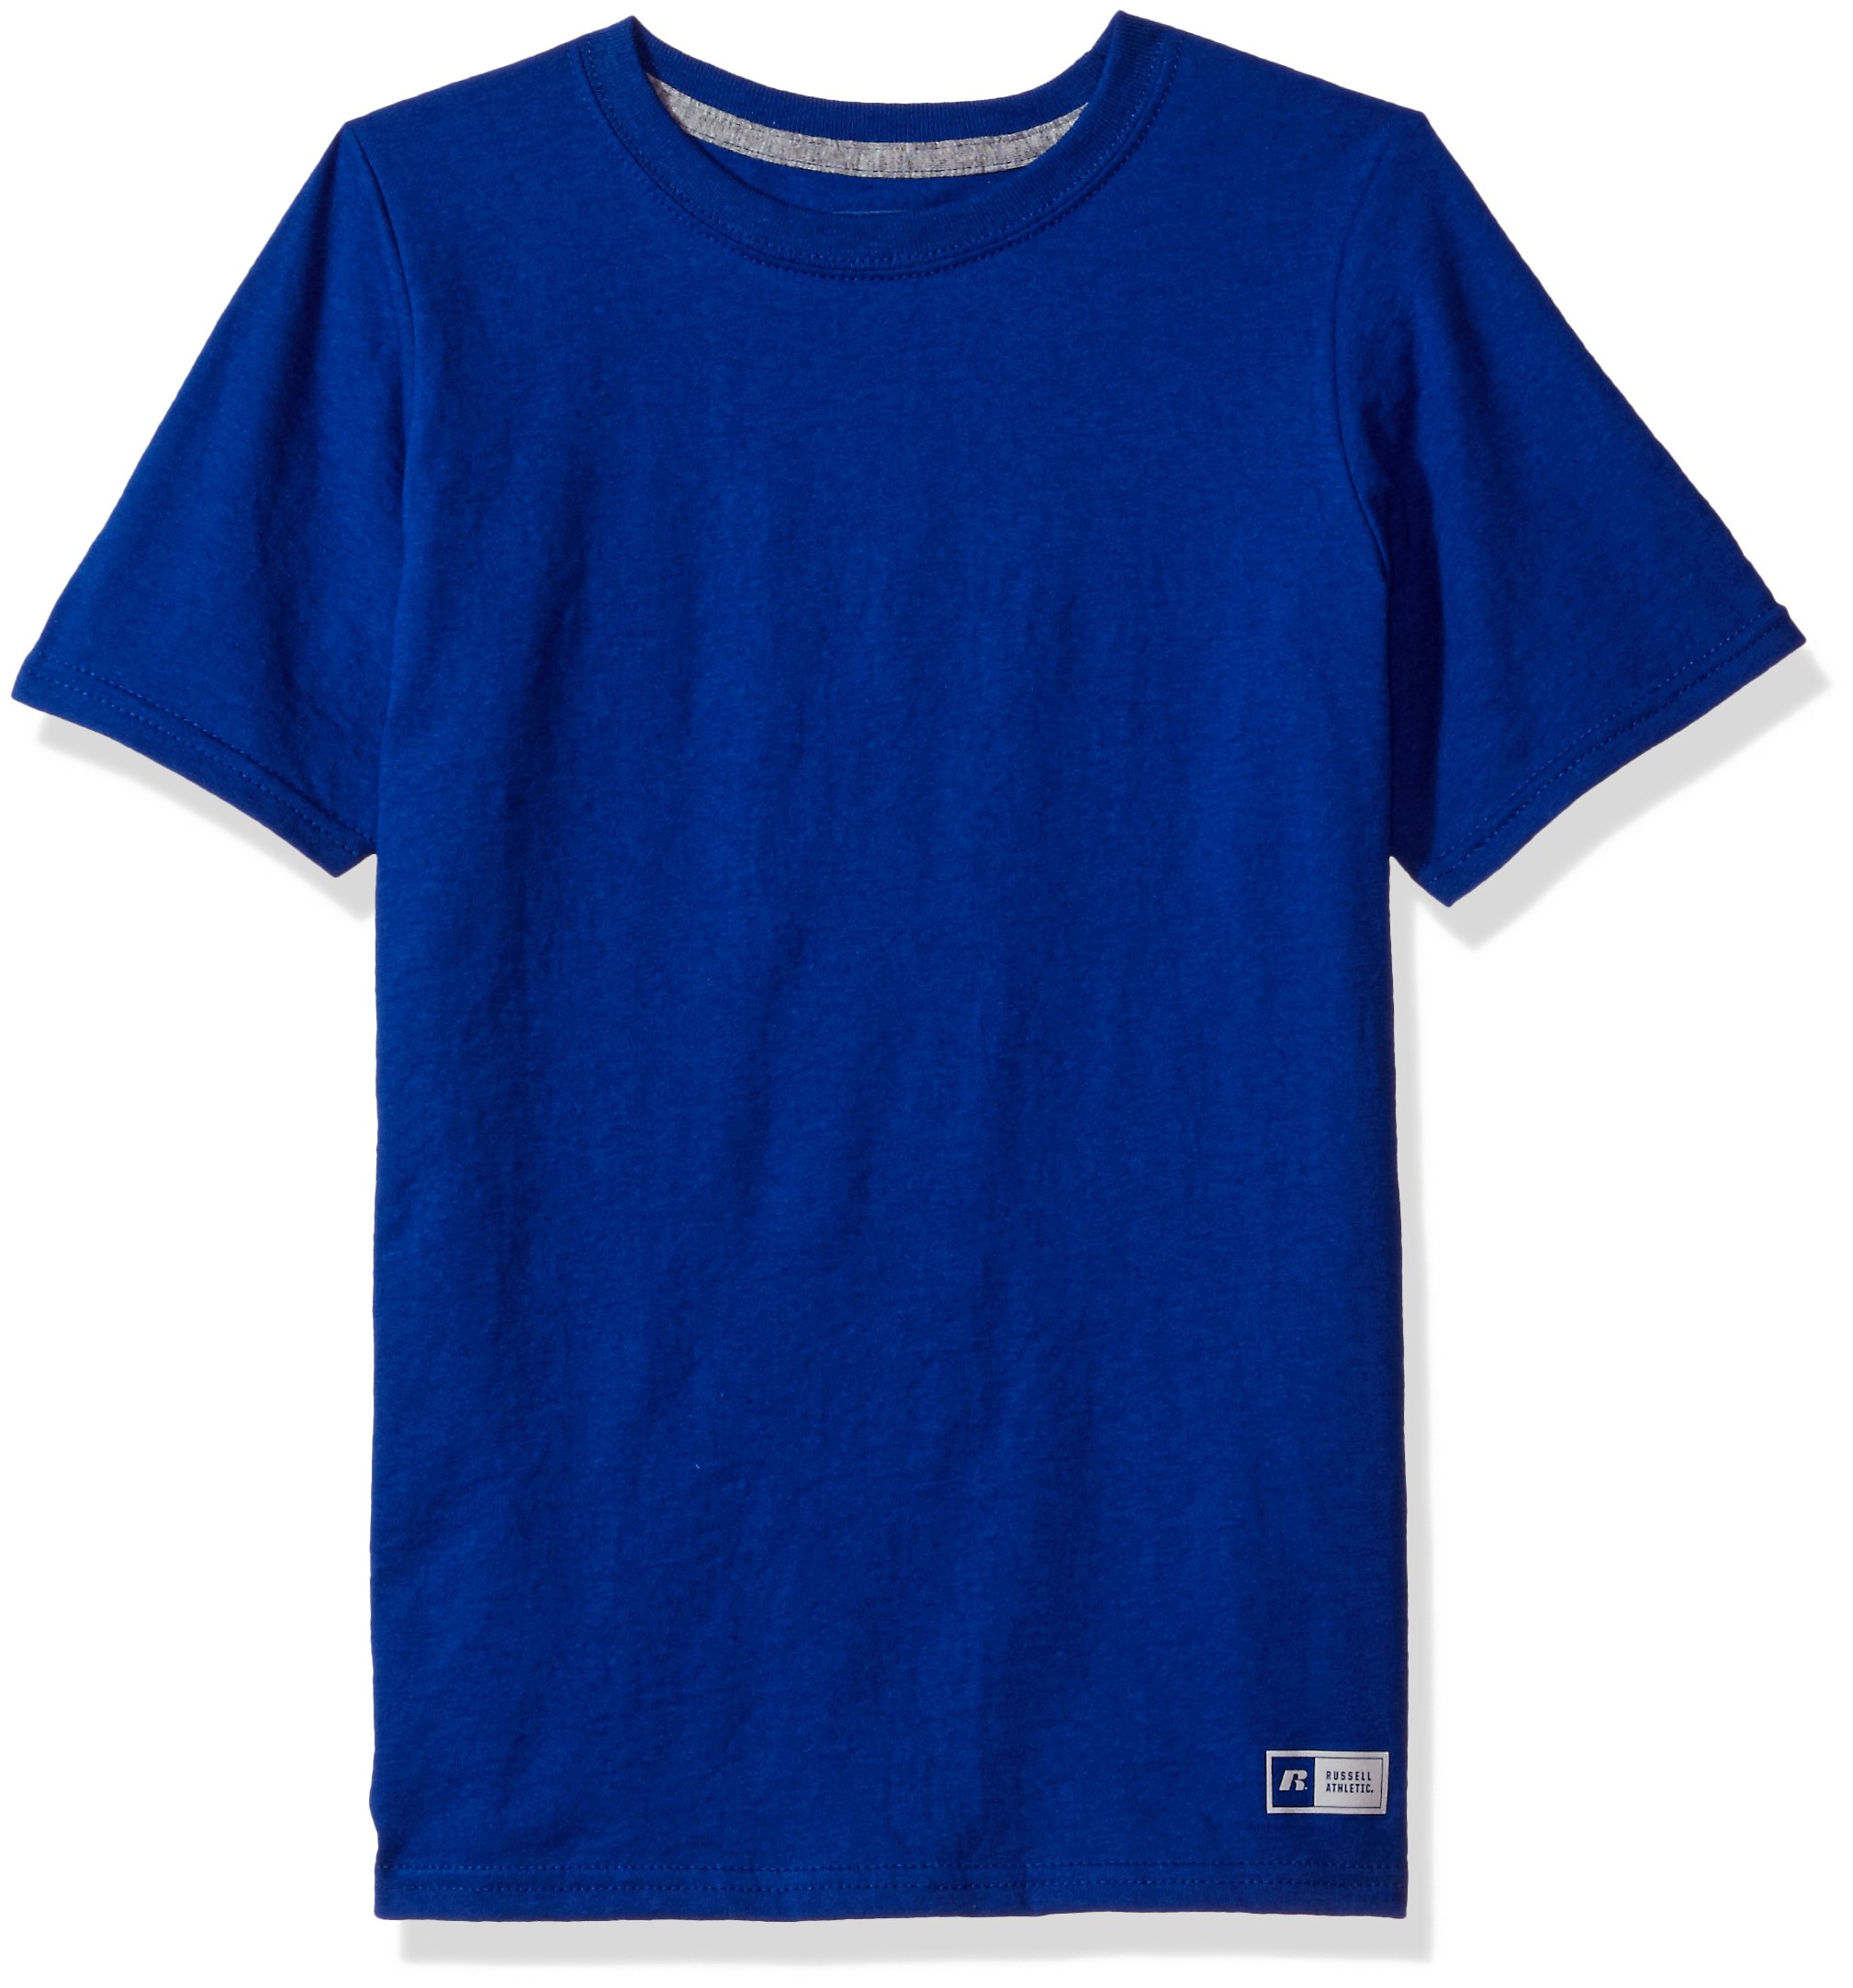 Russell Athletic Boys' Big Performance Cotton Short Sleeve T-Shirt, Royal, Small